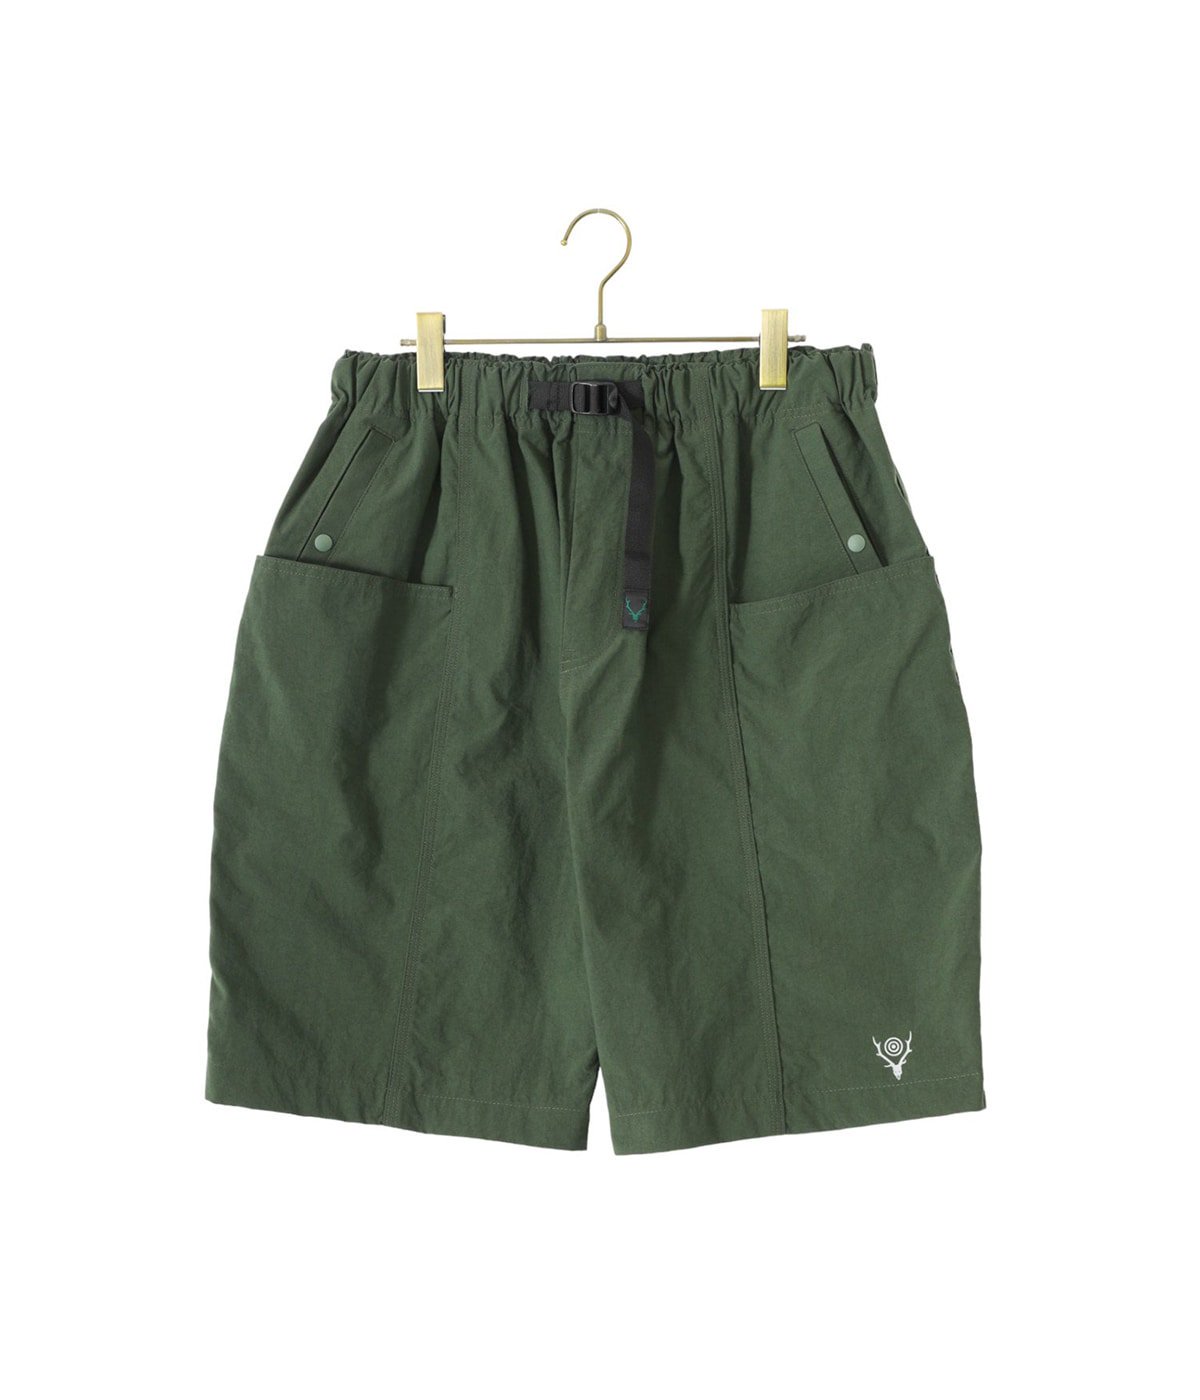 Belted C.S. Short - Nylon Ox ford | South2 West8(サウスツー